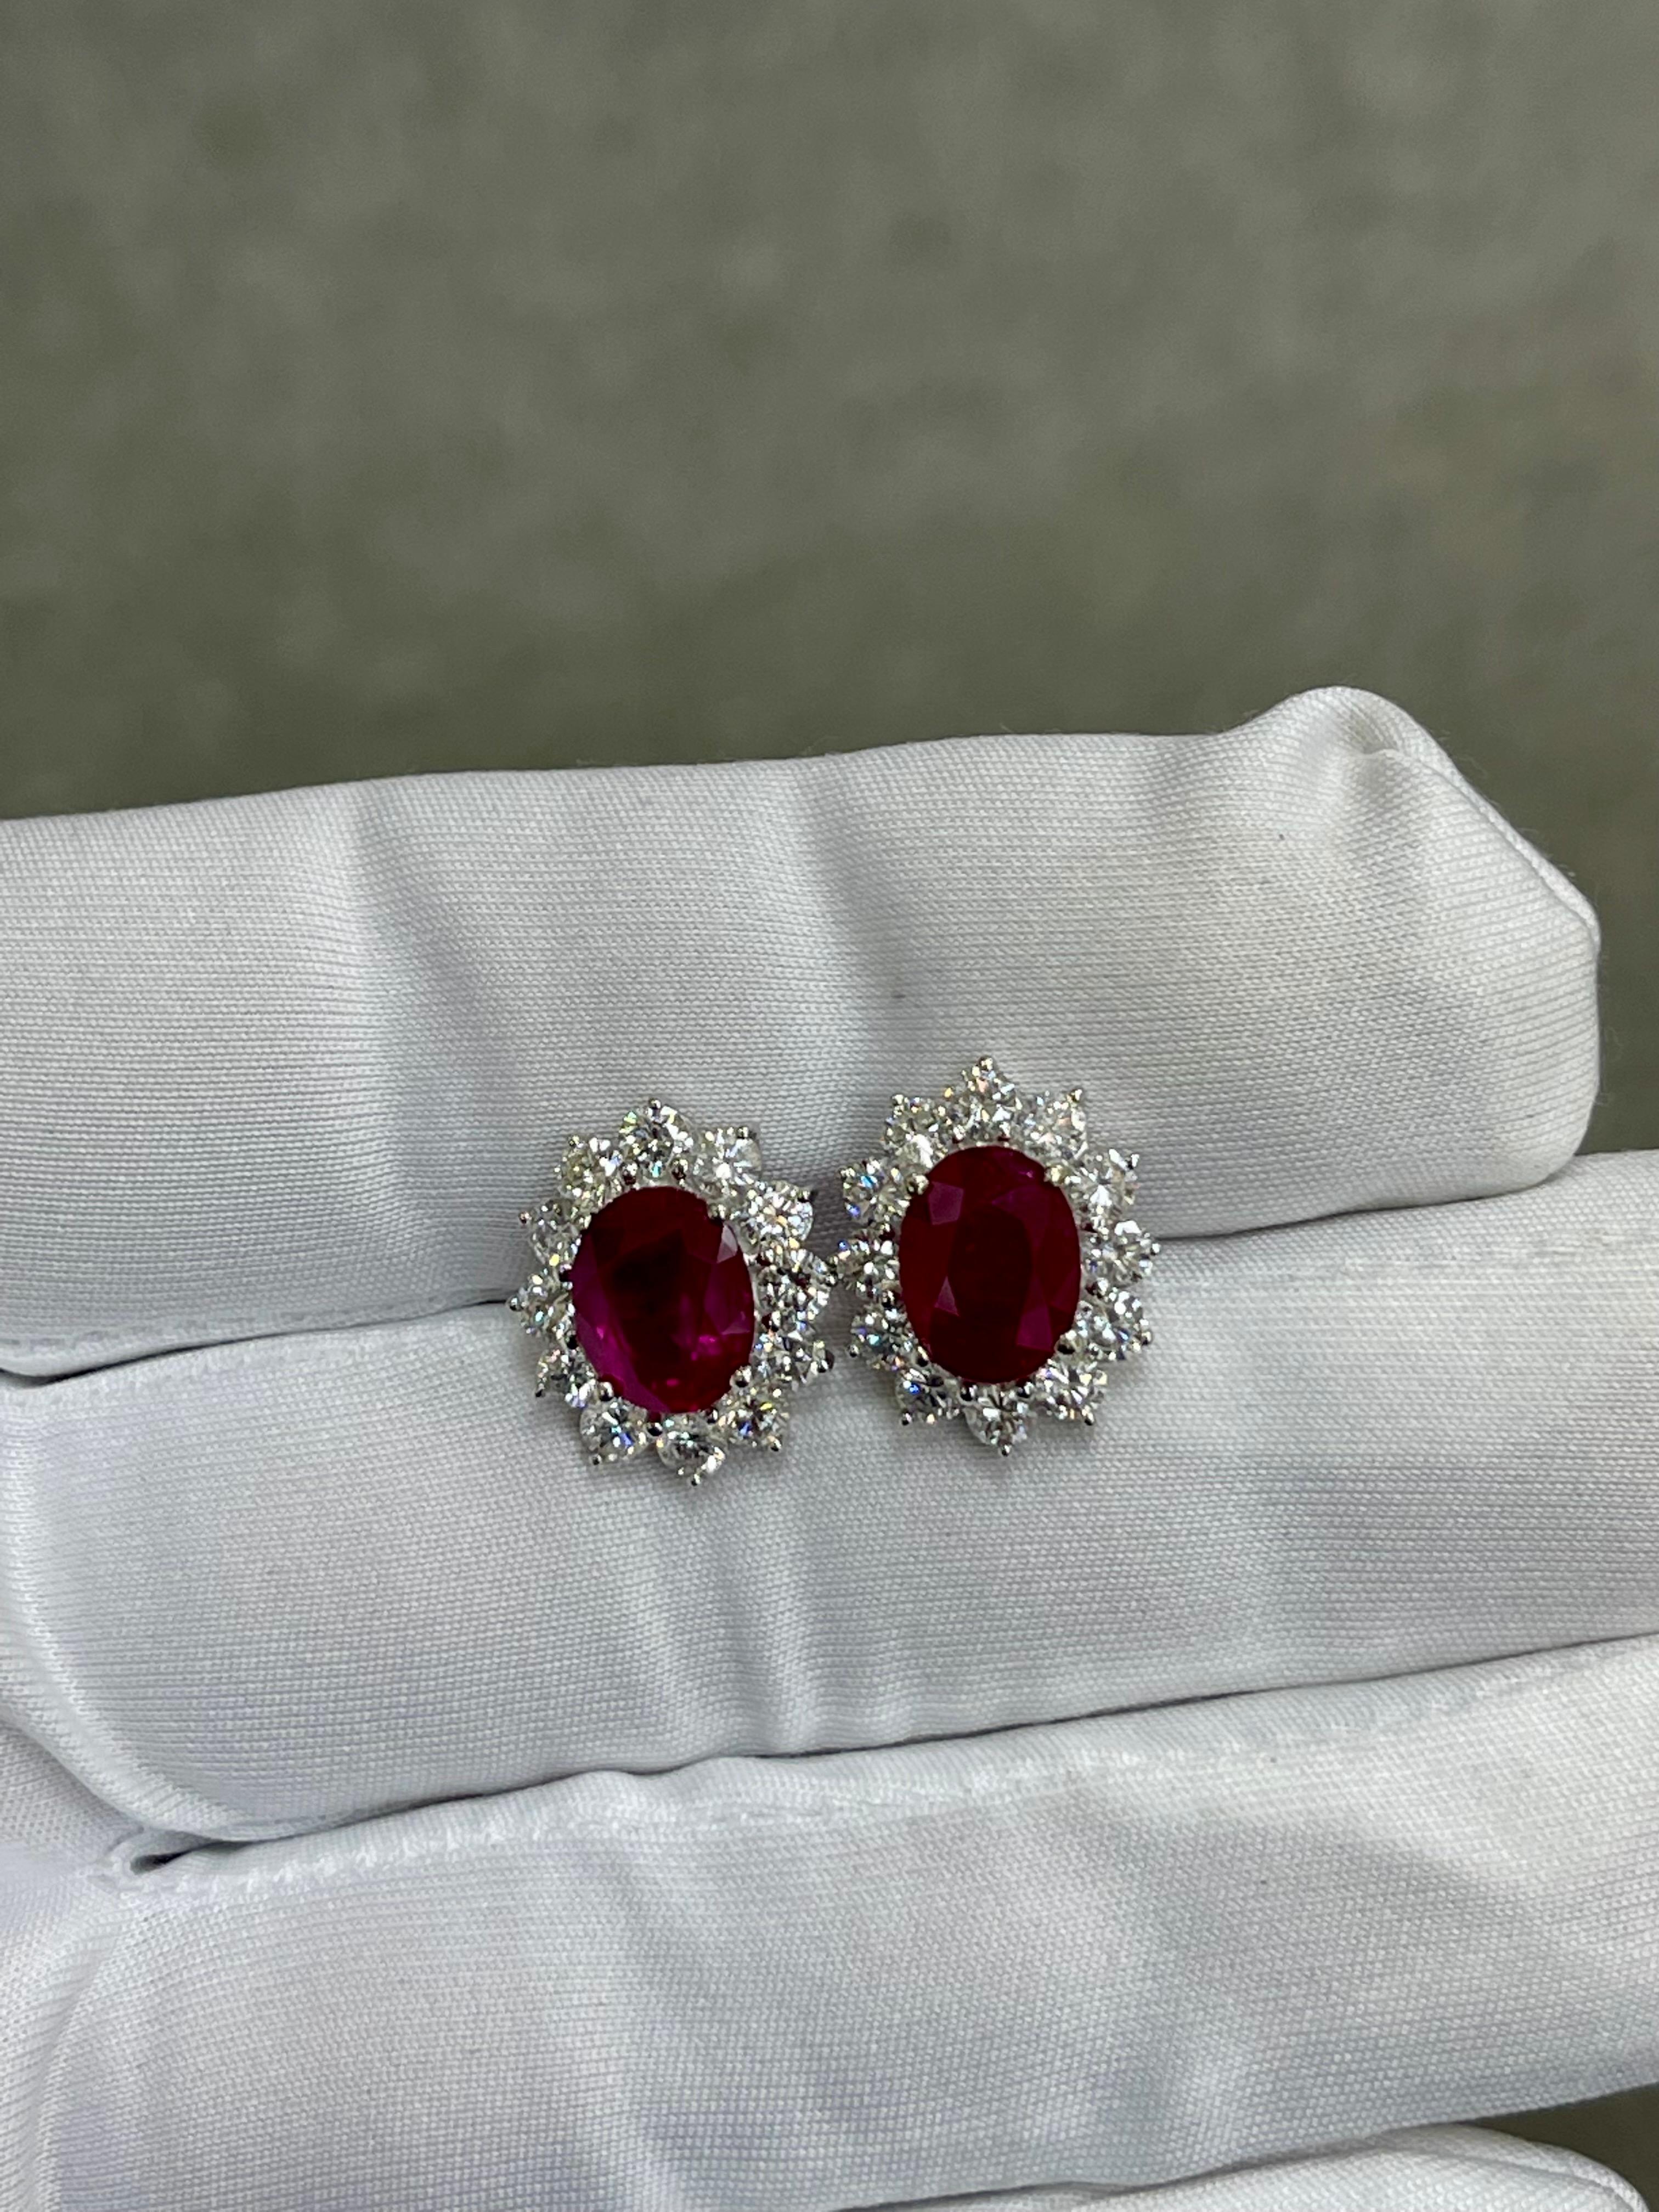 Oval Cut Vivid Red Ruby 4.00 CTW & Diamond Stud Earrings, Close to Pigeon Blood Red